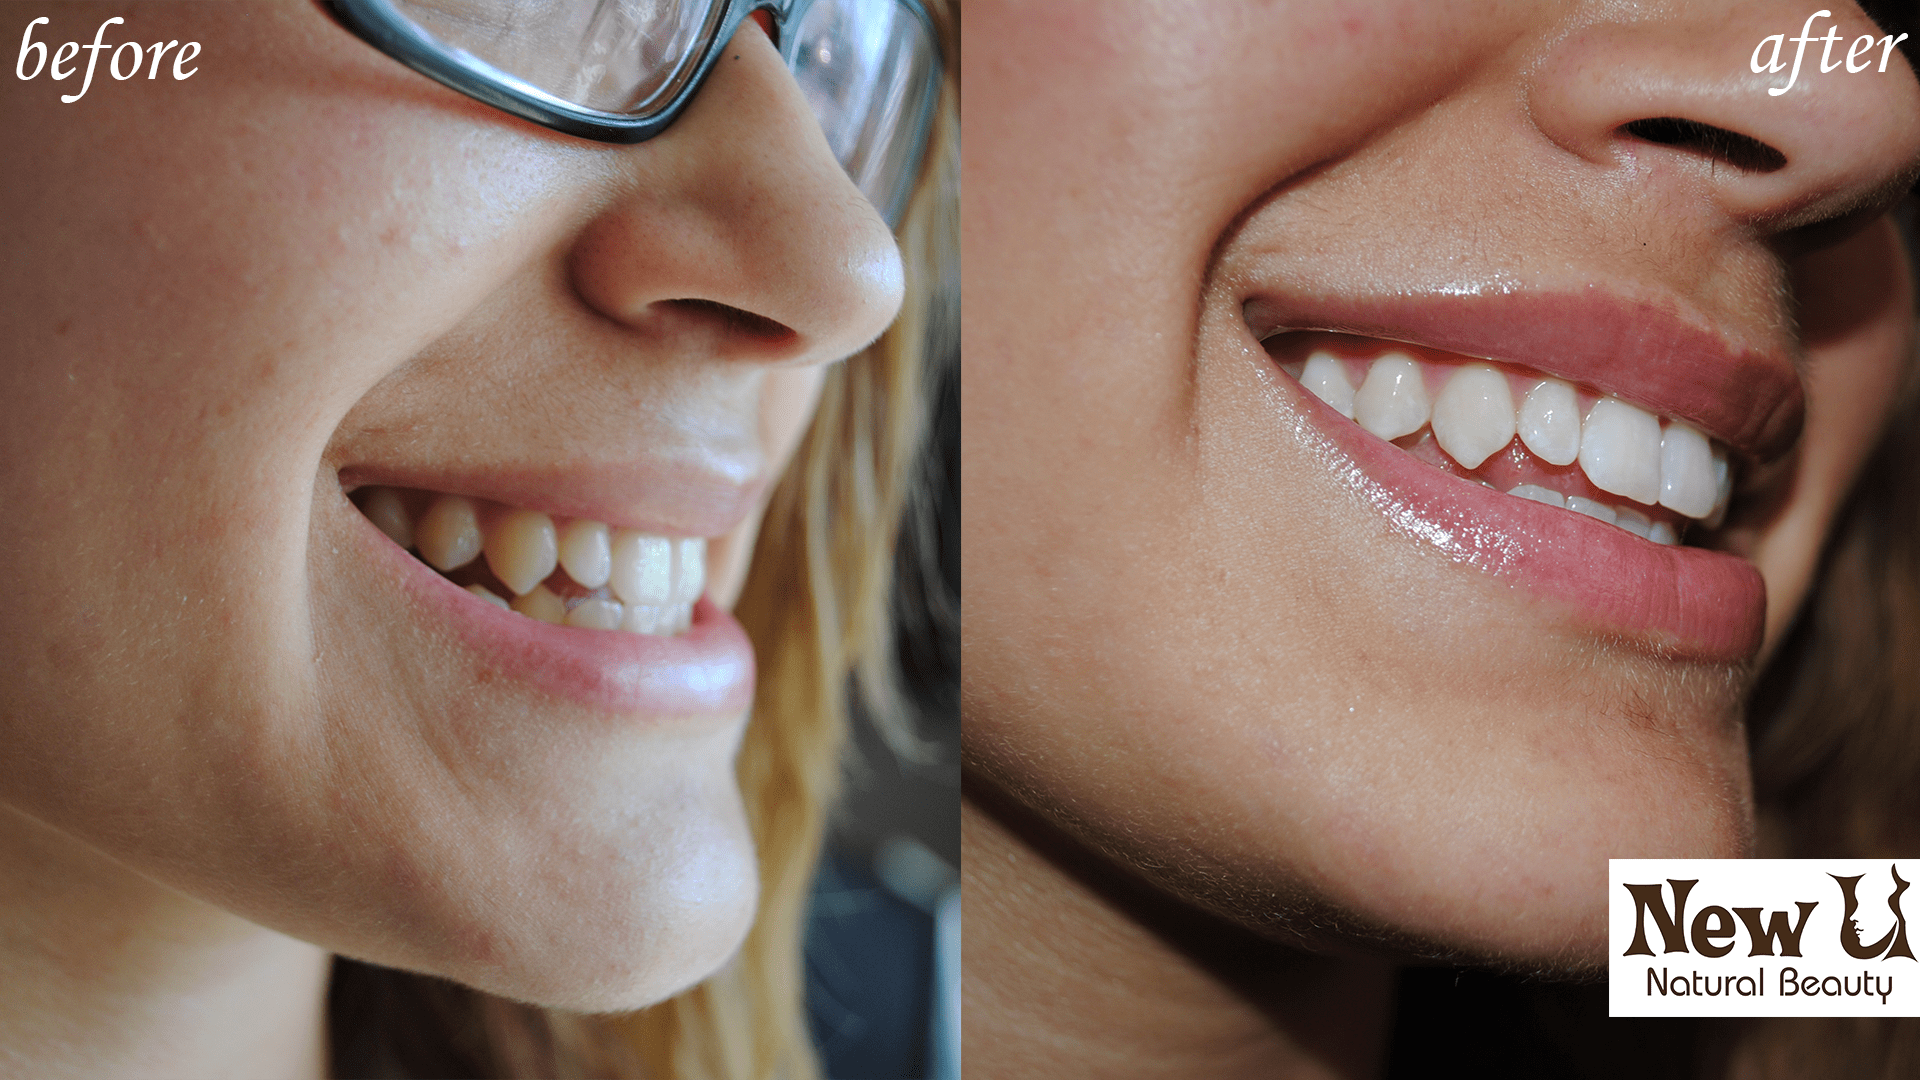 Teeth Whitening Las Vegas Before and After